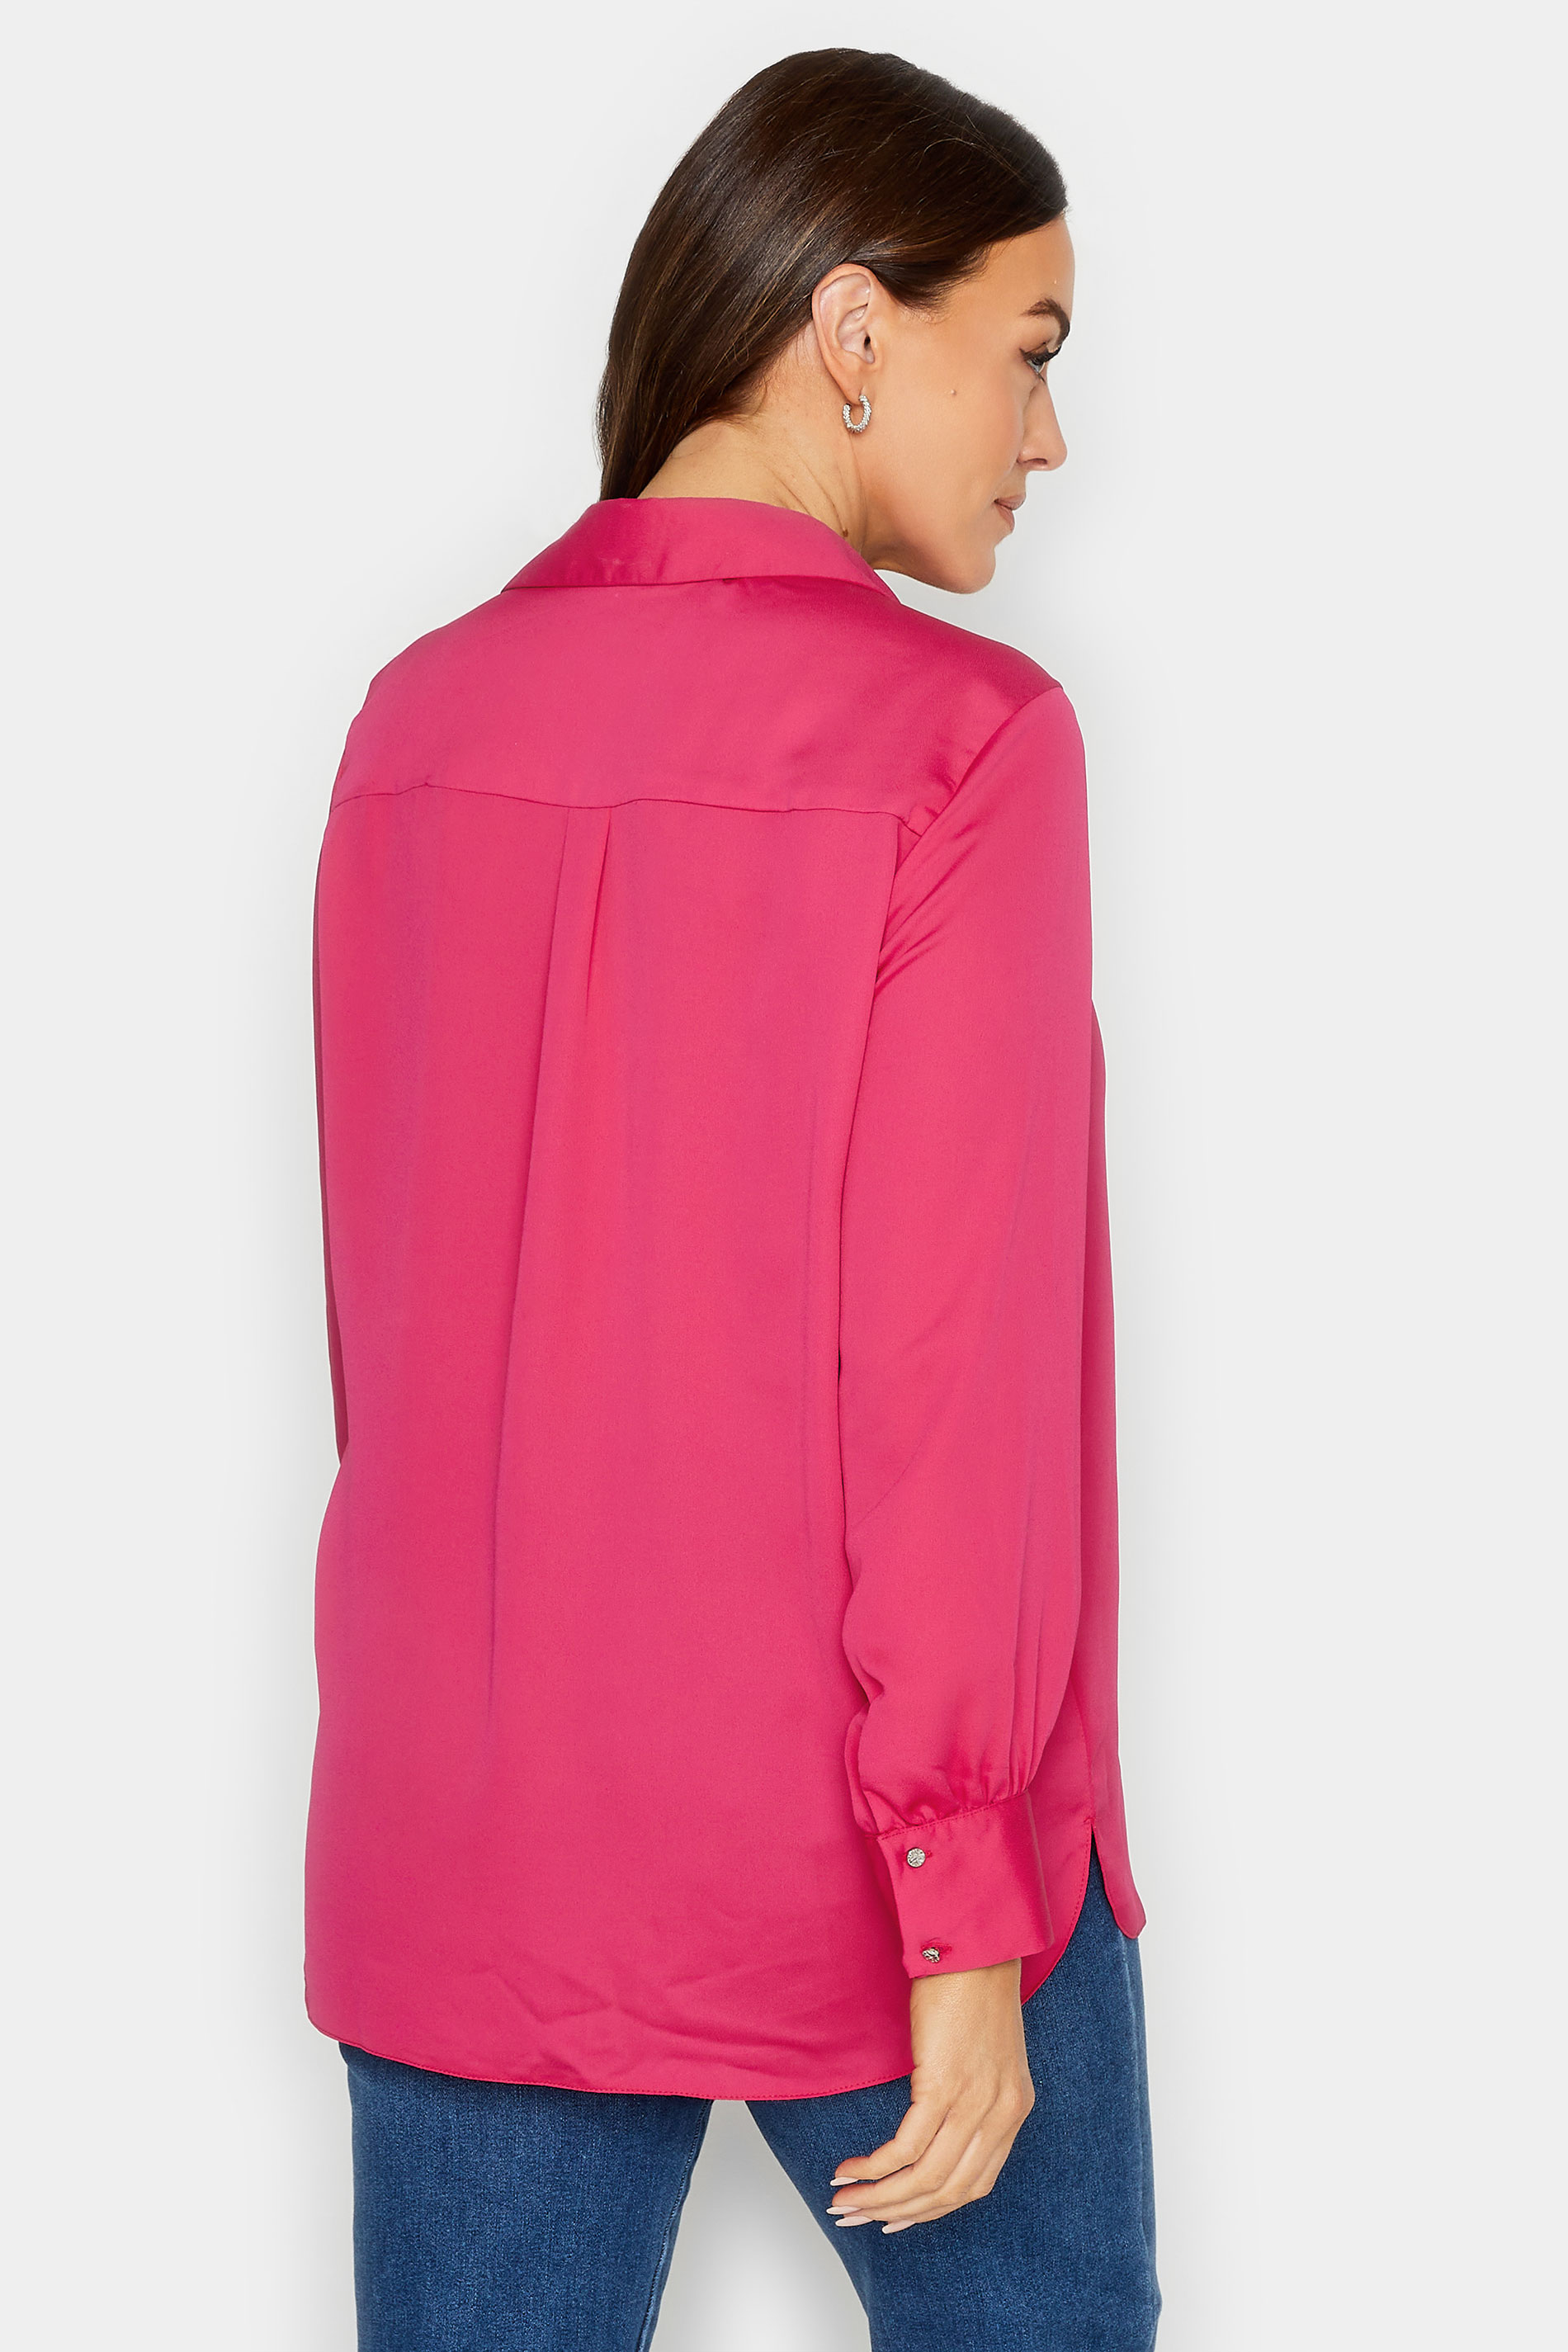 M&Co Hot Pink V-Neck Collared Blouse | M&Co 3